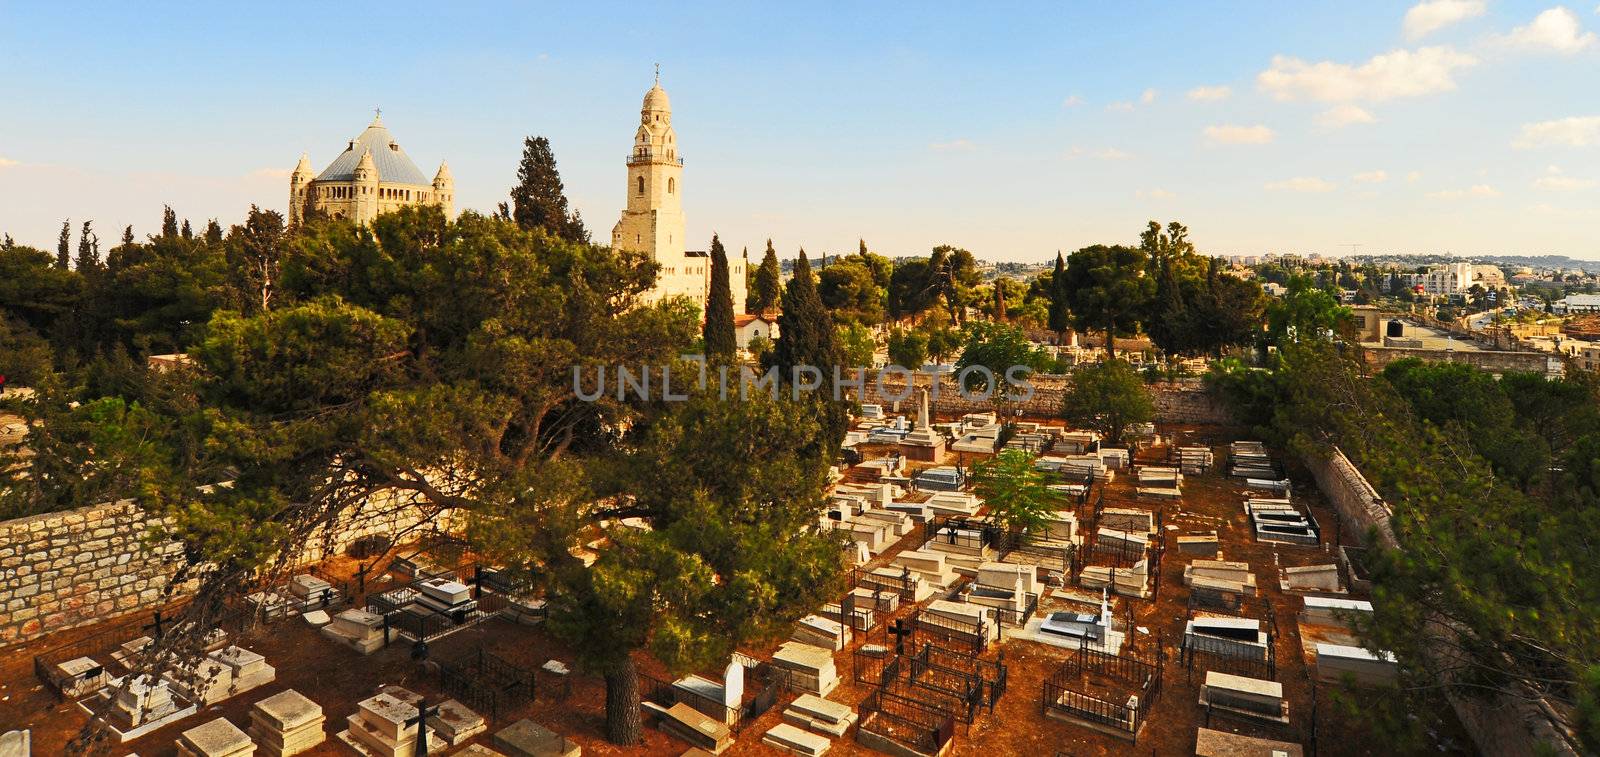 Church of  Dormition and Armenian Cemetery on Mount Zion